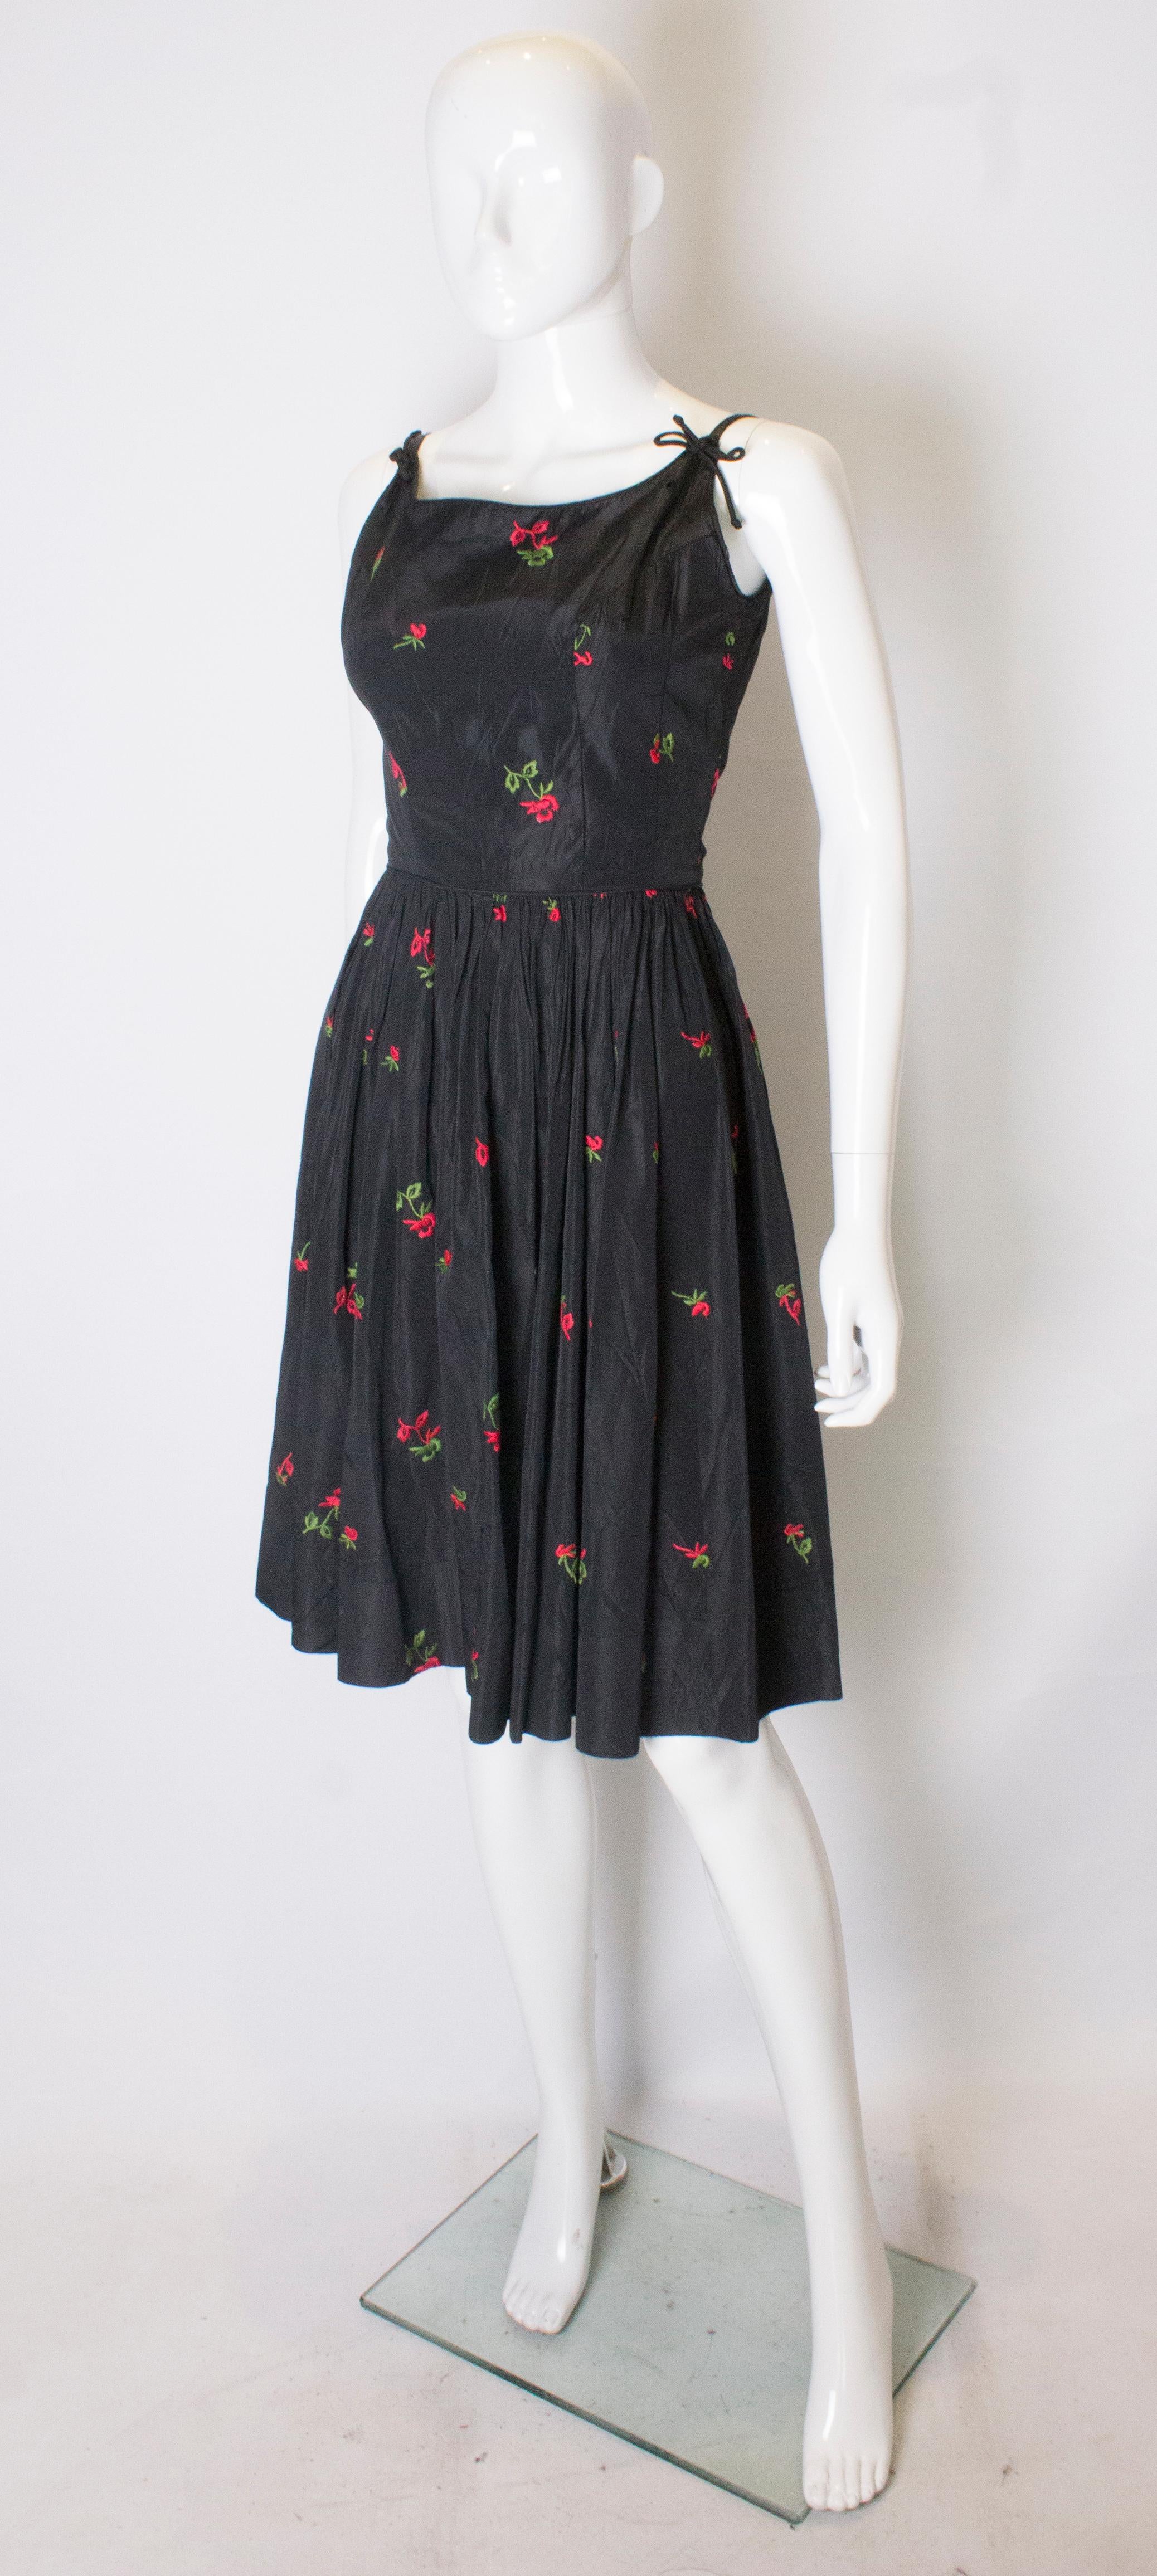 black dress with embroidered flowers